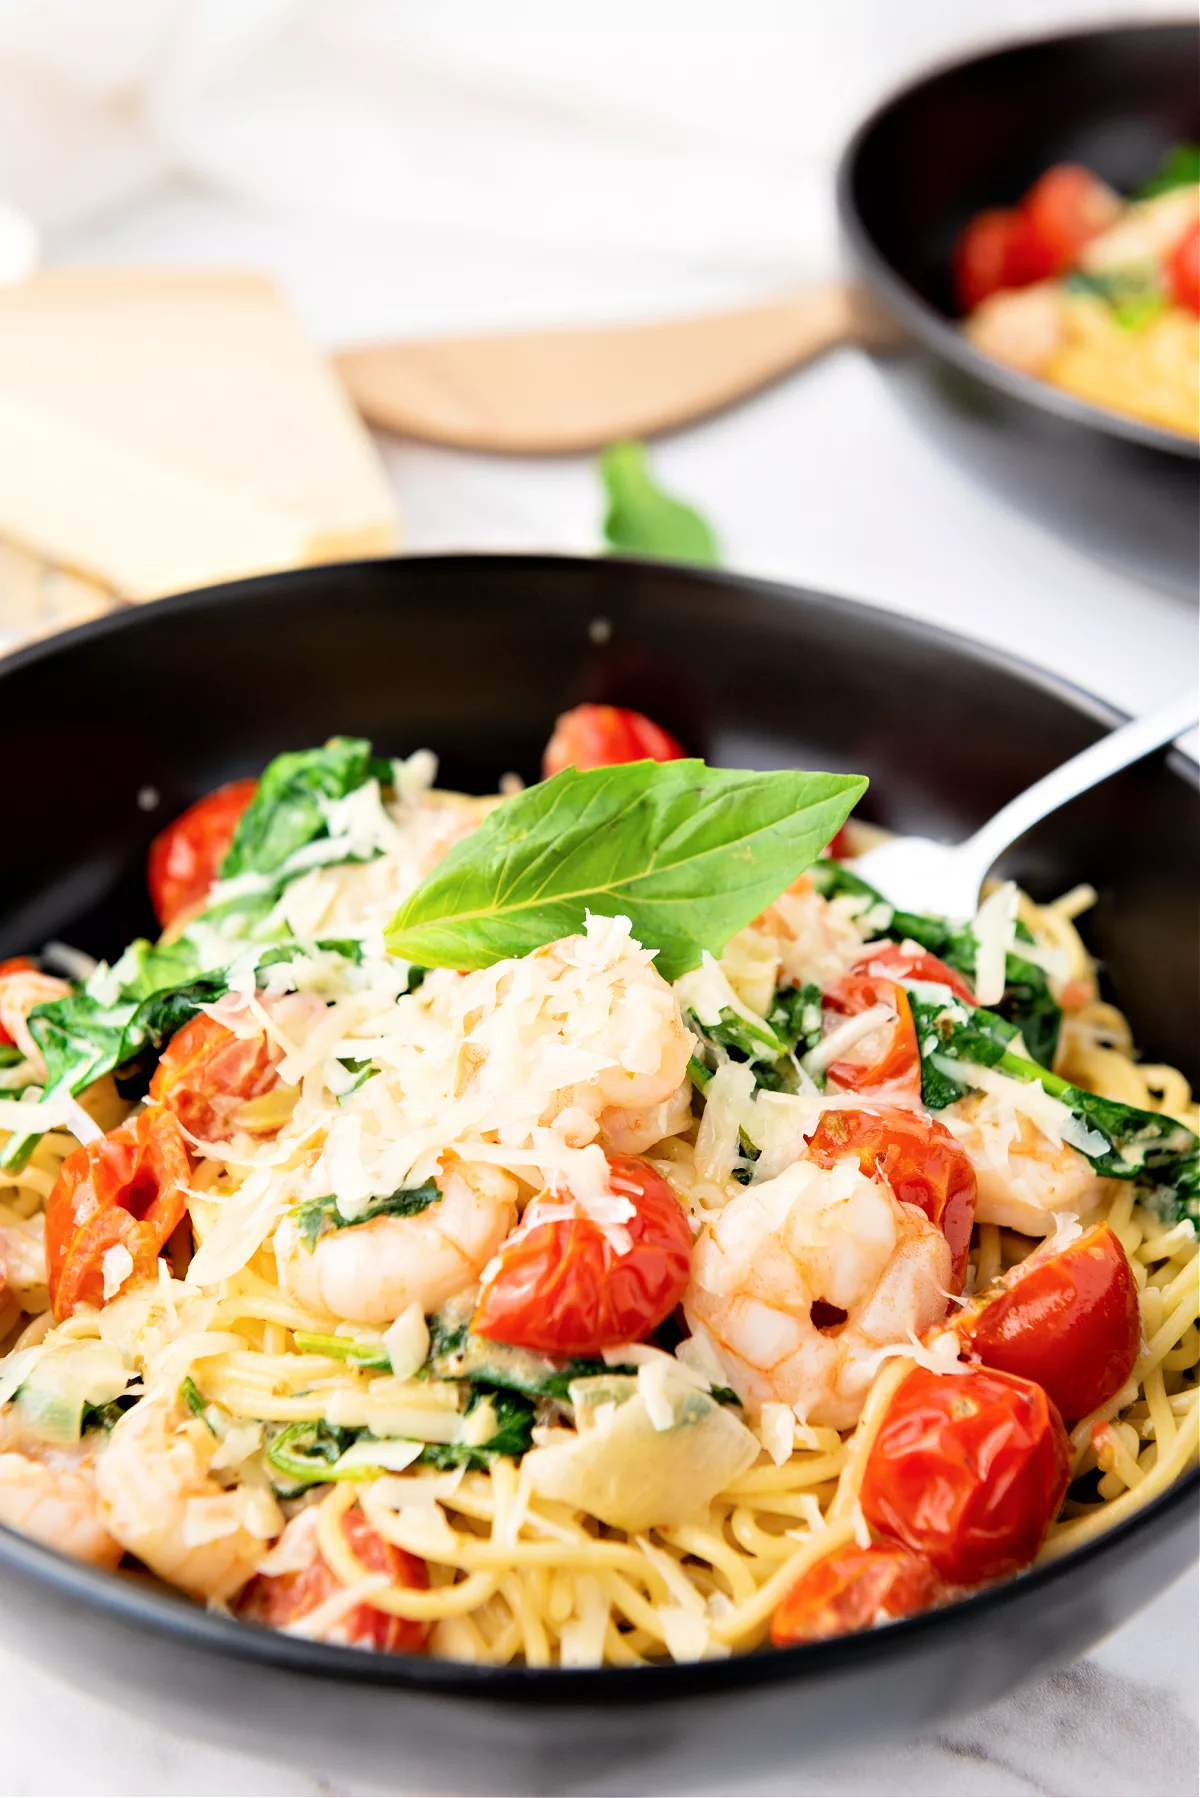 Overhead shot of fork in a bowlful of shrimp scampi with angel hair pasta, filled with cherry tomatoes and spinach and grated cheese